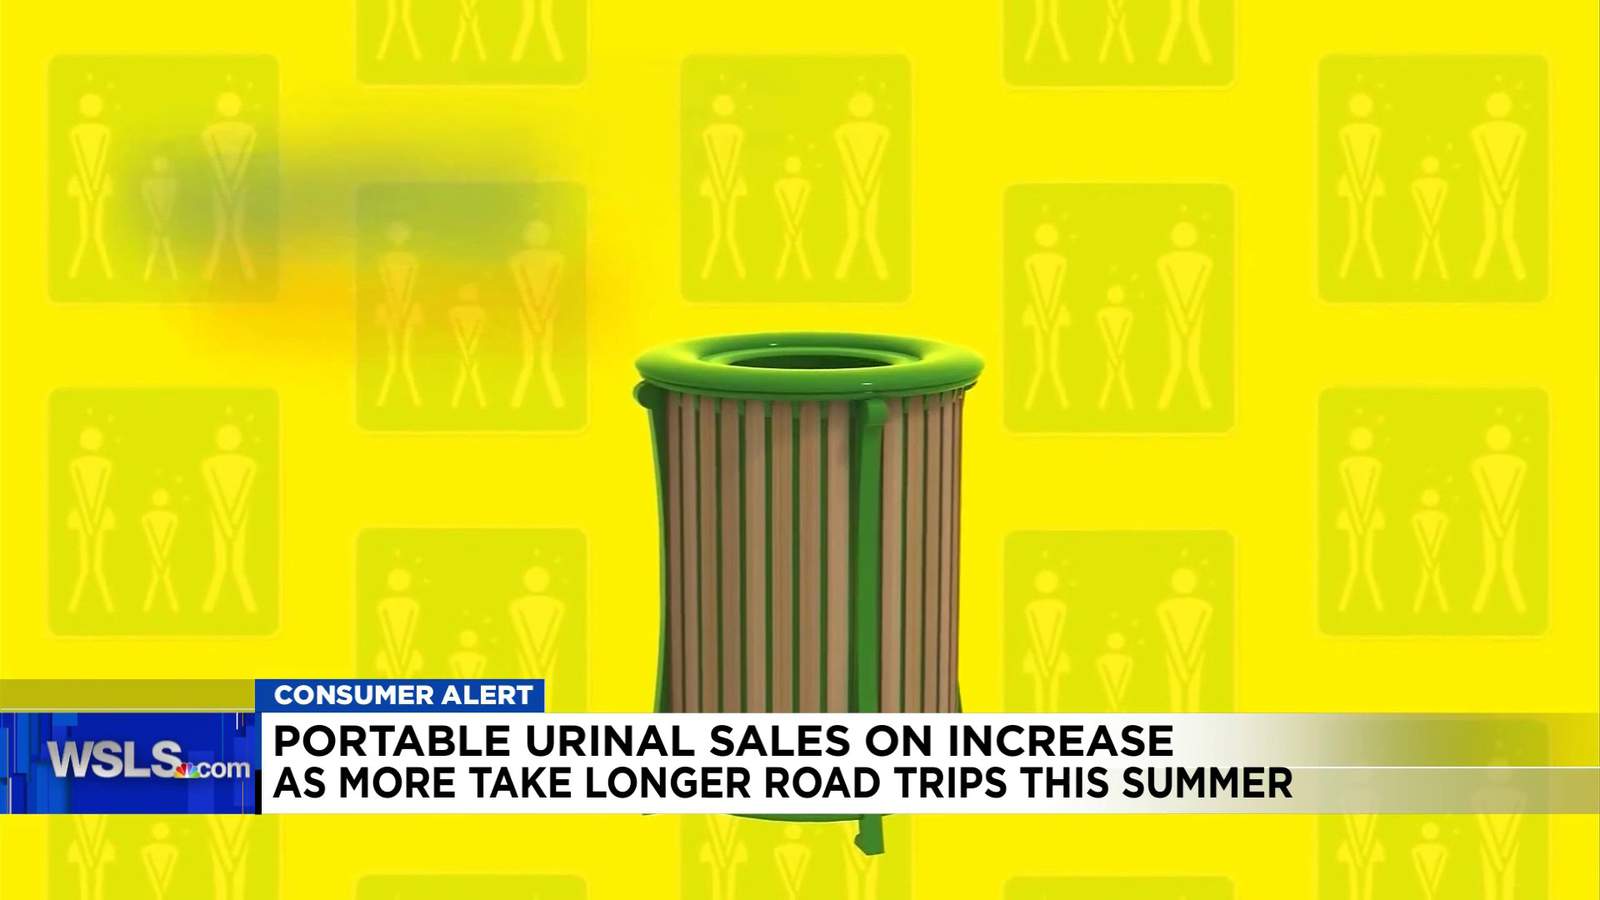 Portable Urinal Bags THE hot ticket item this summer? 10 News anchors crack up over this one